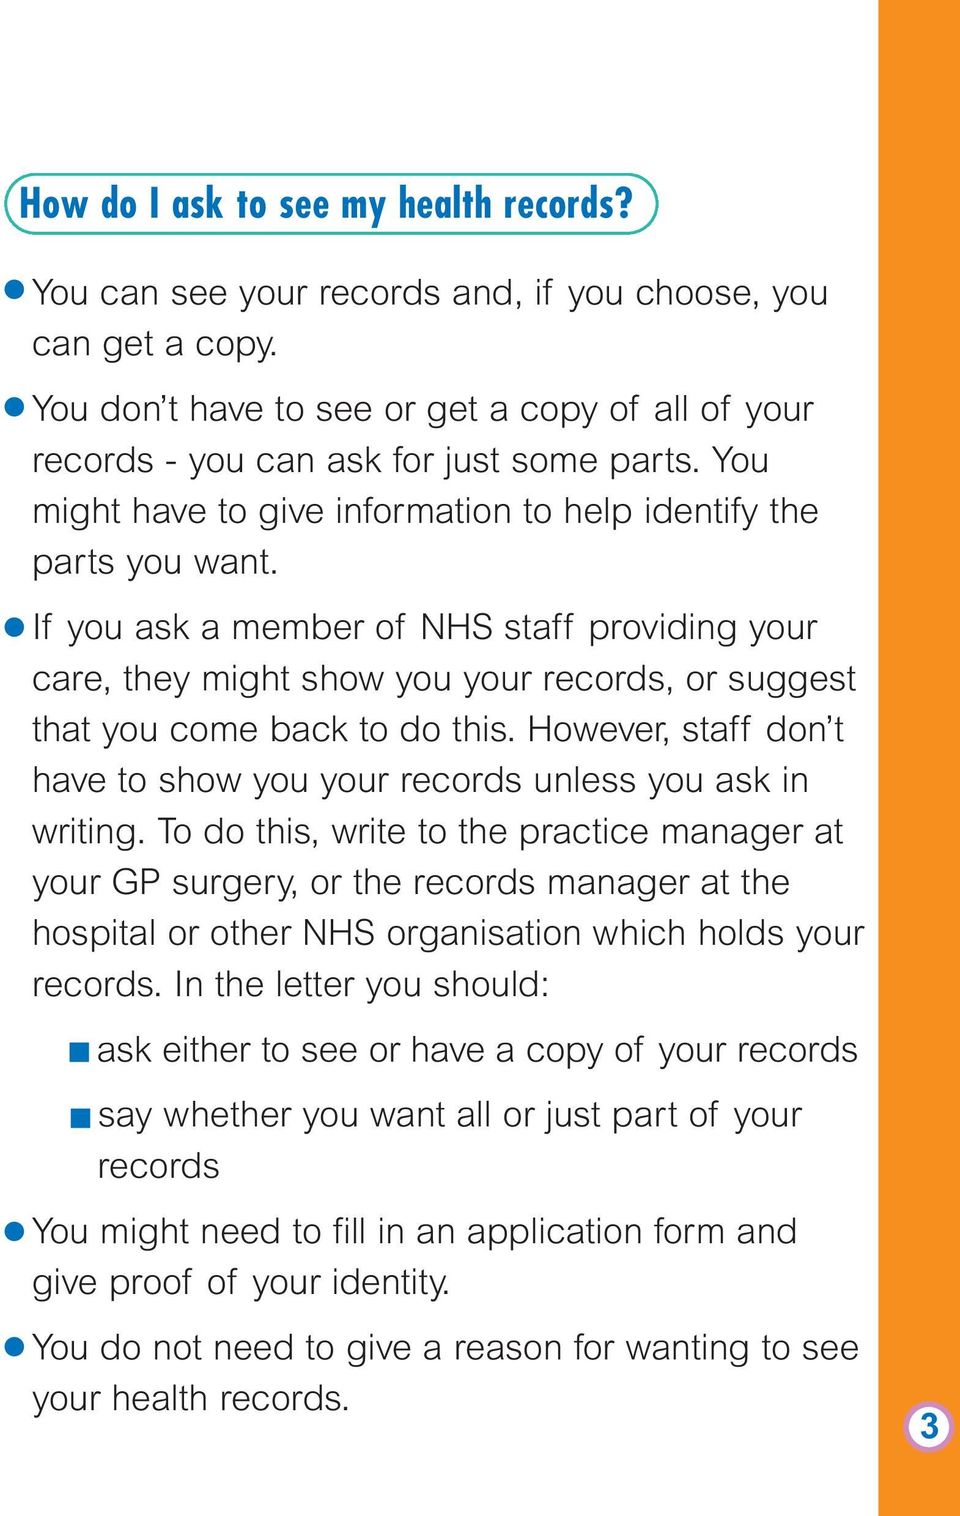 If you ask a member of NHS staff providing your care, they might show you your records, or suggest that you come back to do this.